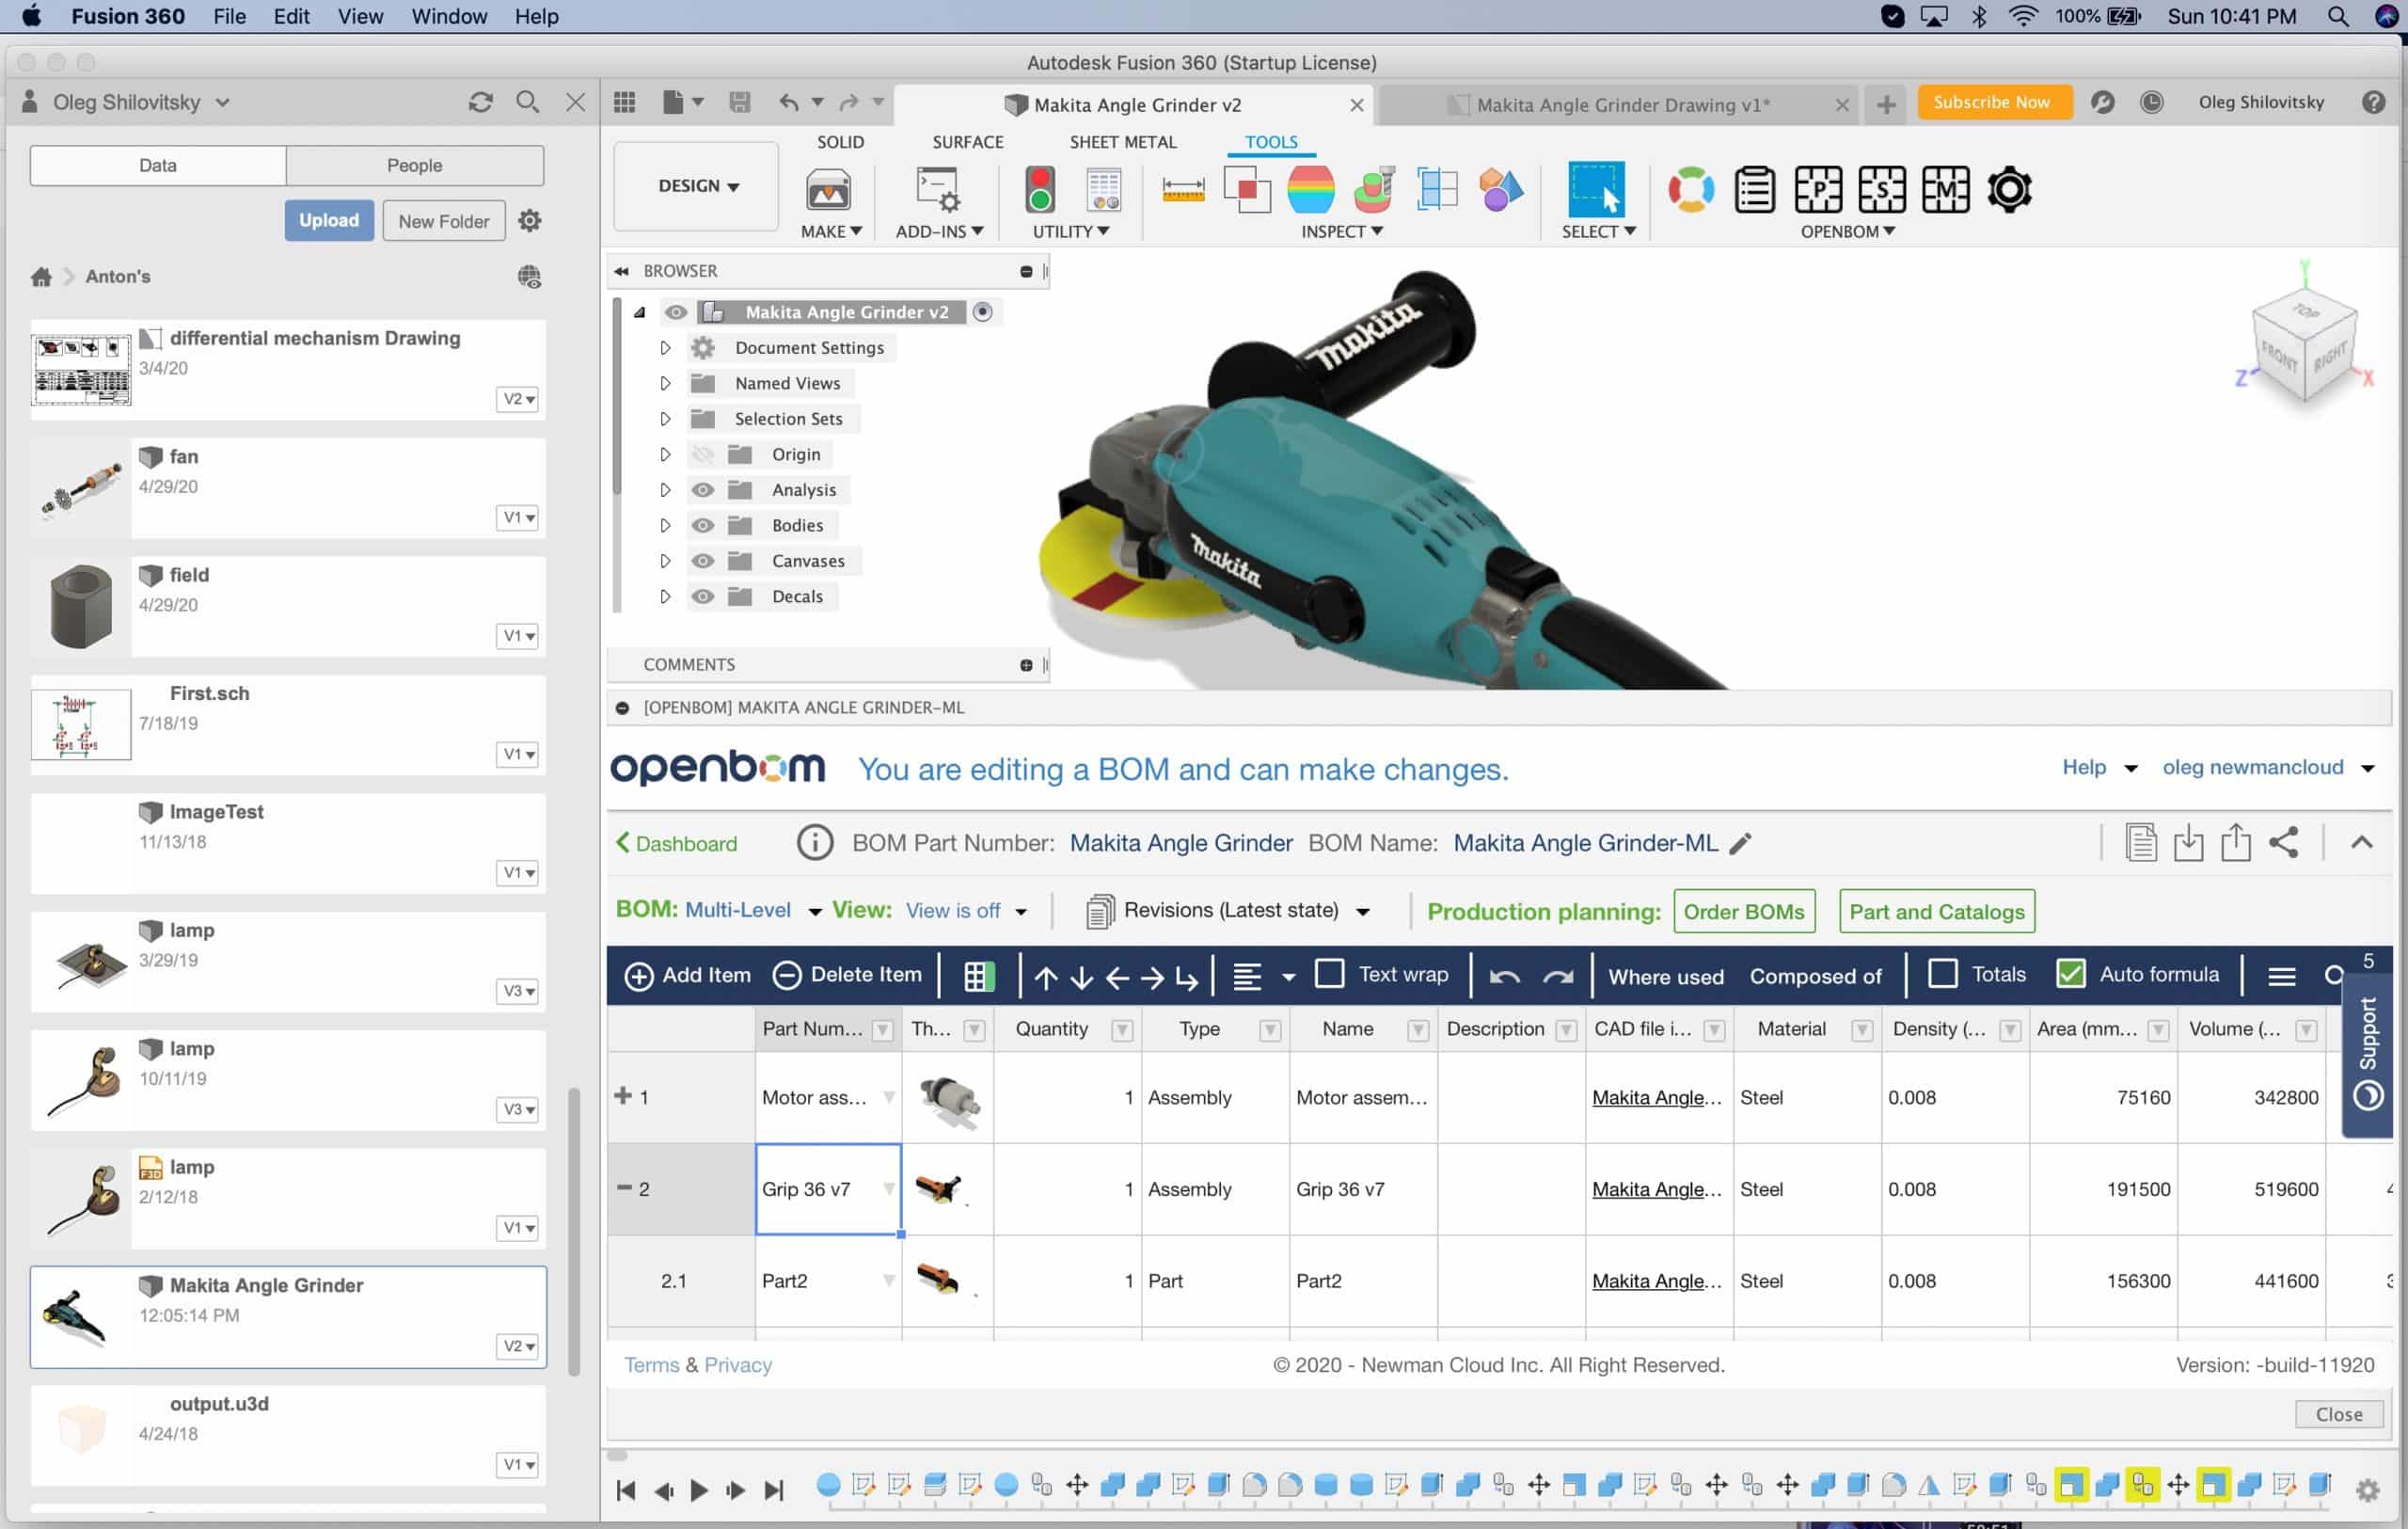 Preview: Autodesk Fusion 360 purchased assemblies and exclude from BOM options